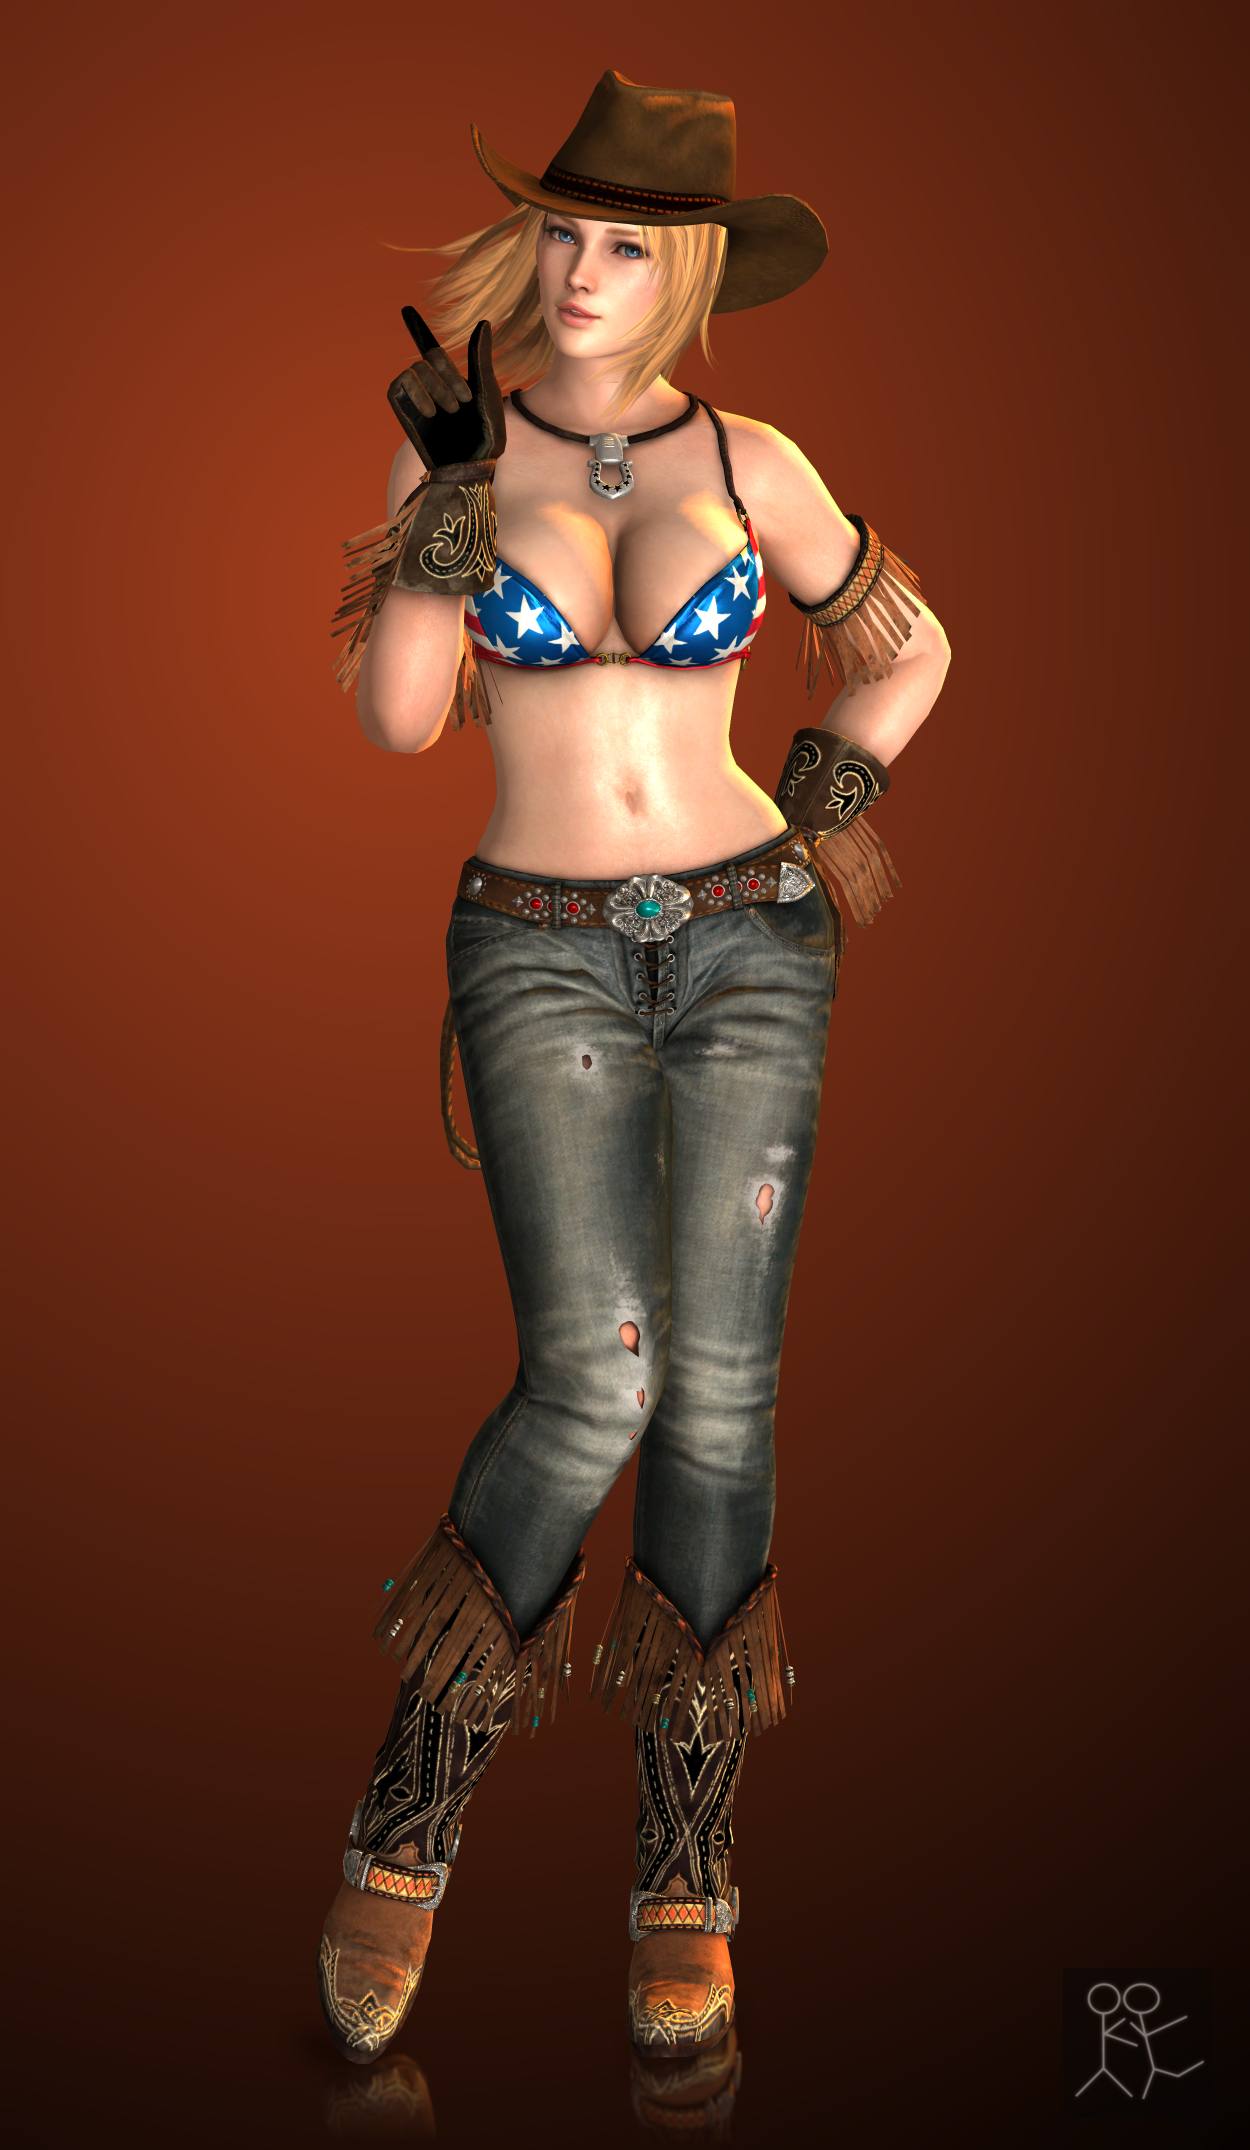 Doa5 Tina Armstrong Cowgirl By Sticklove On Deviantart 